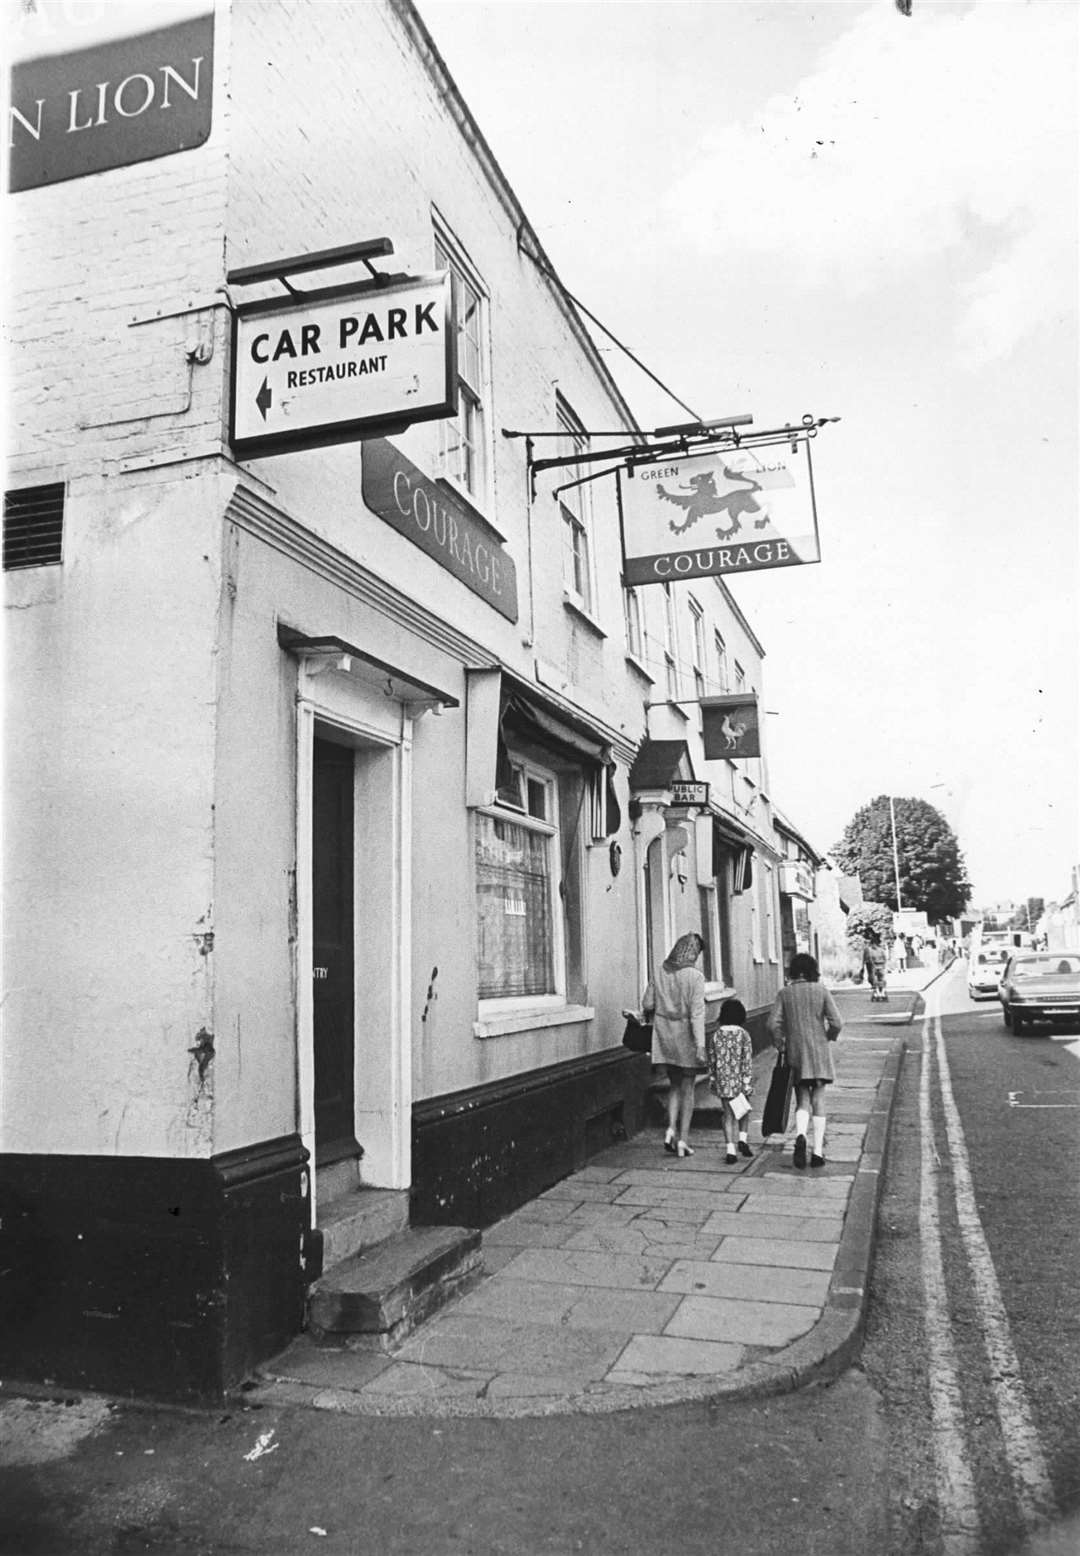 The Green Lion public house in September 1974